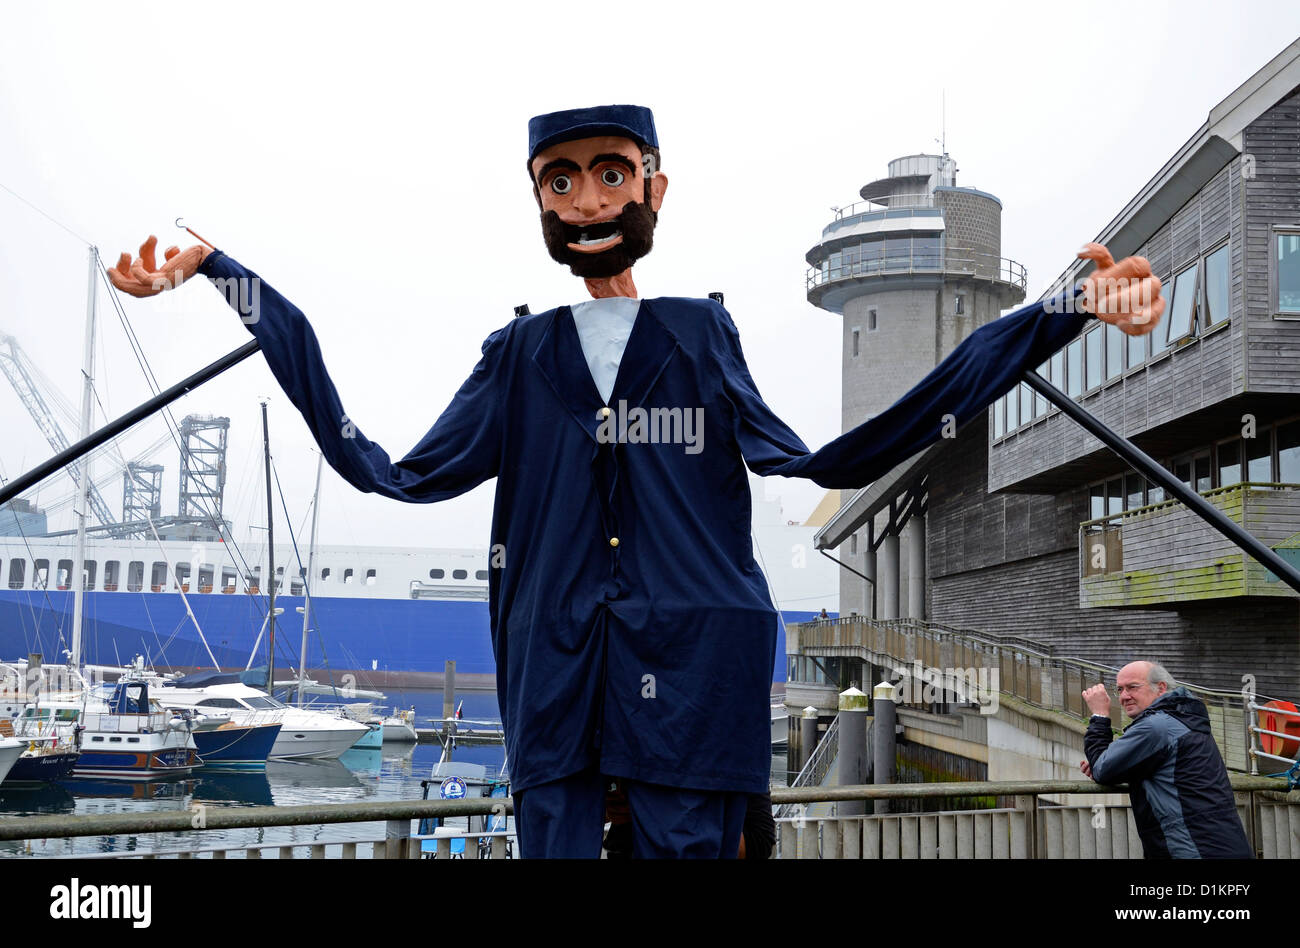 a giant sailor marionette puppet at the docks in falmouth, cornwall, uk Stock Photo